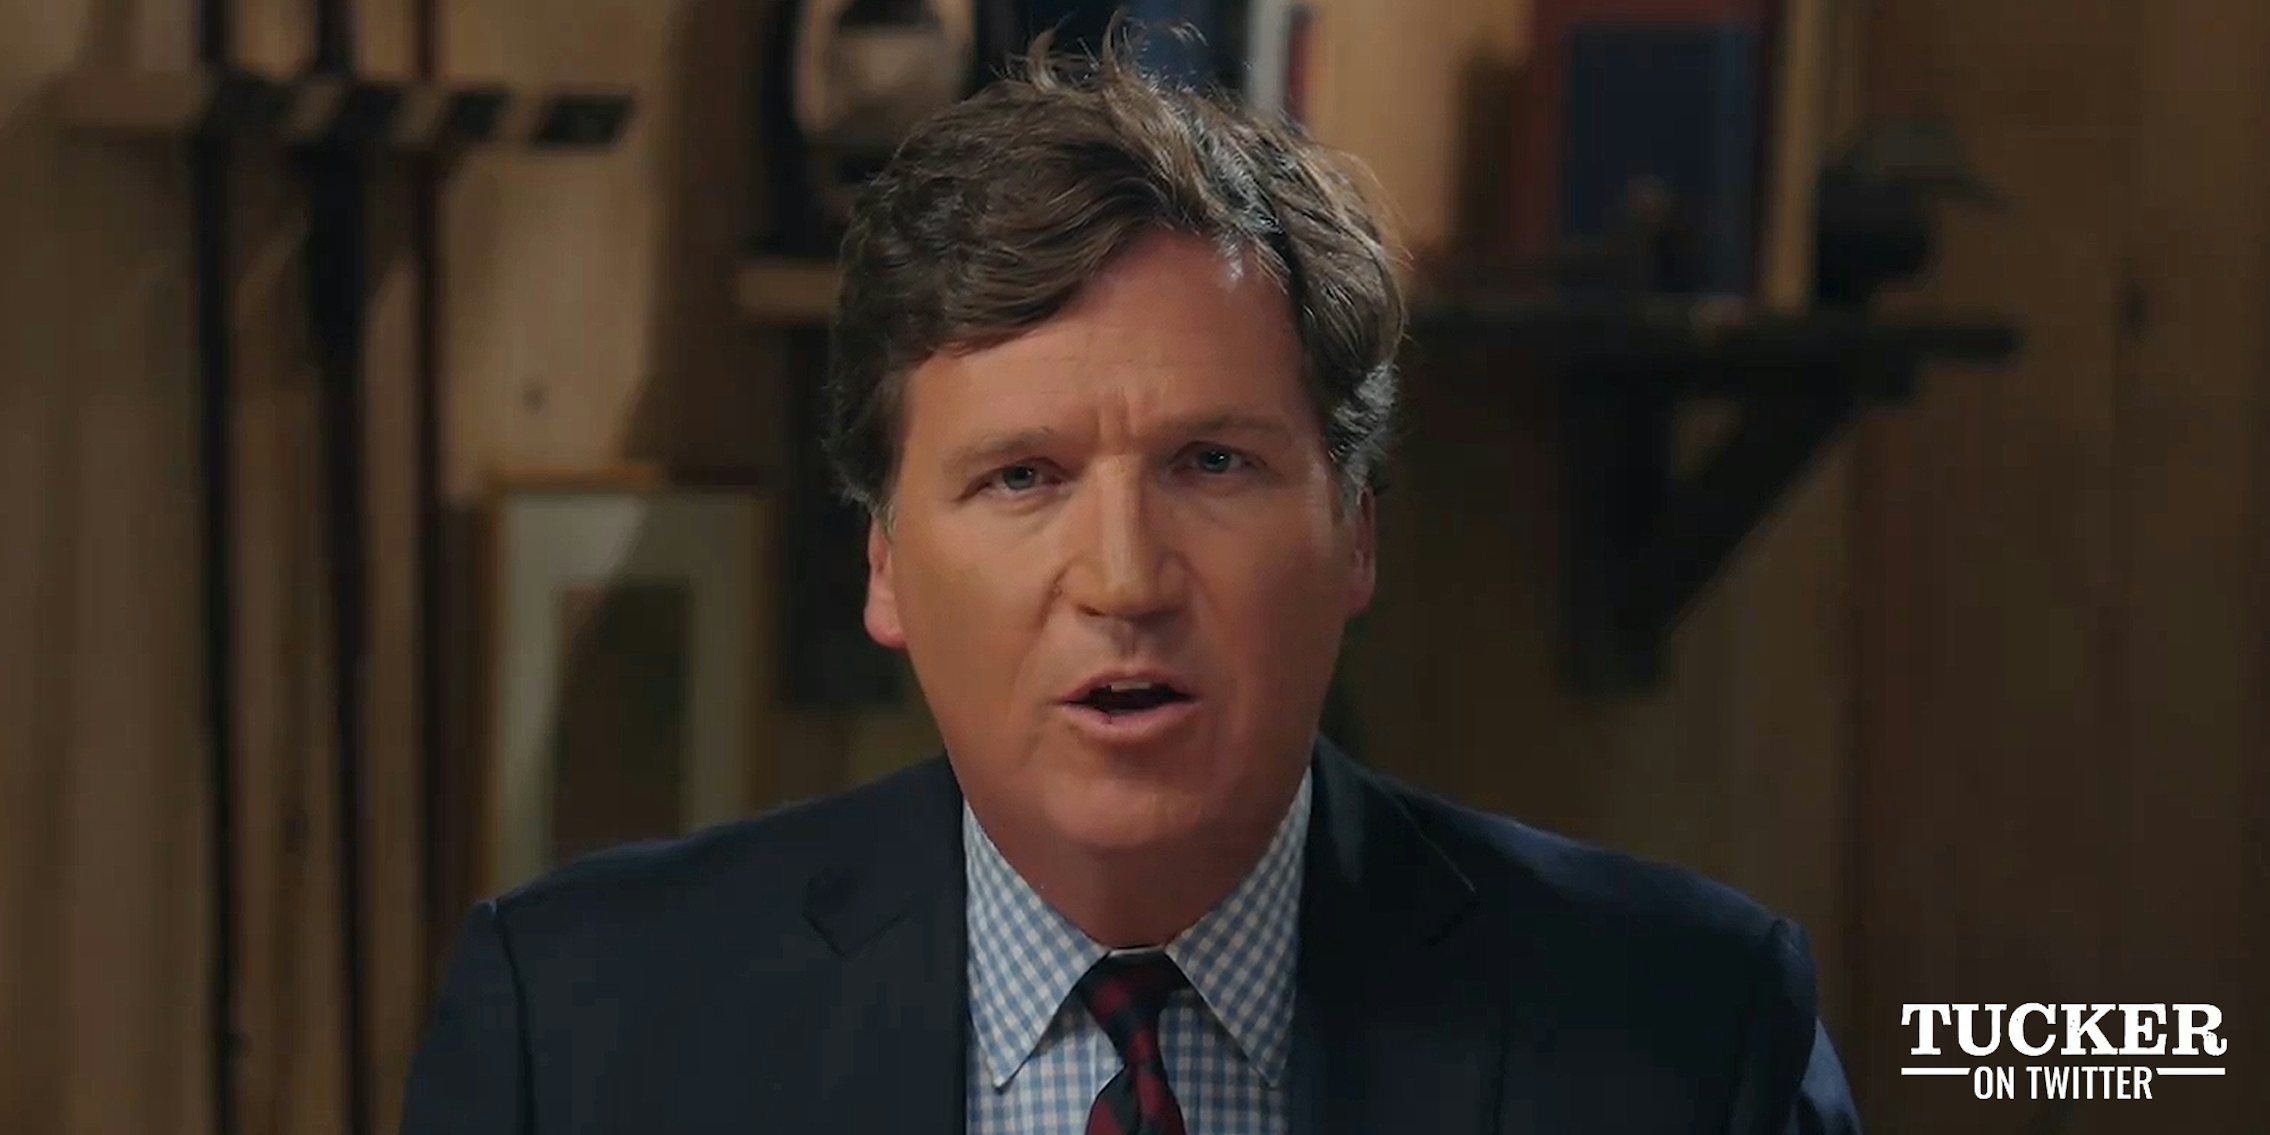 Tucker Carlson speaking in front of blurry brown background during Tucker On Twitter Ep. 1